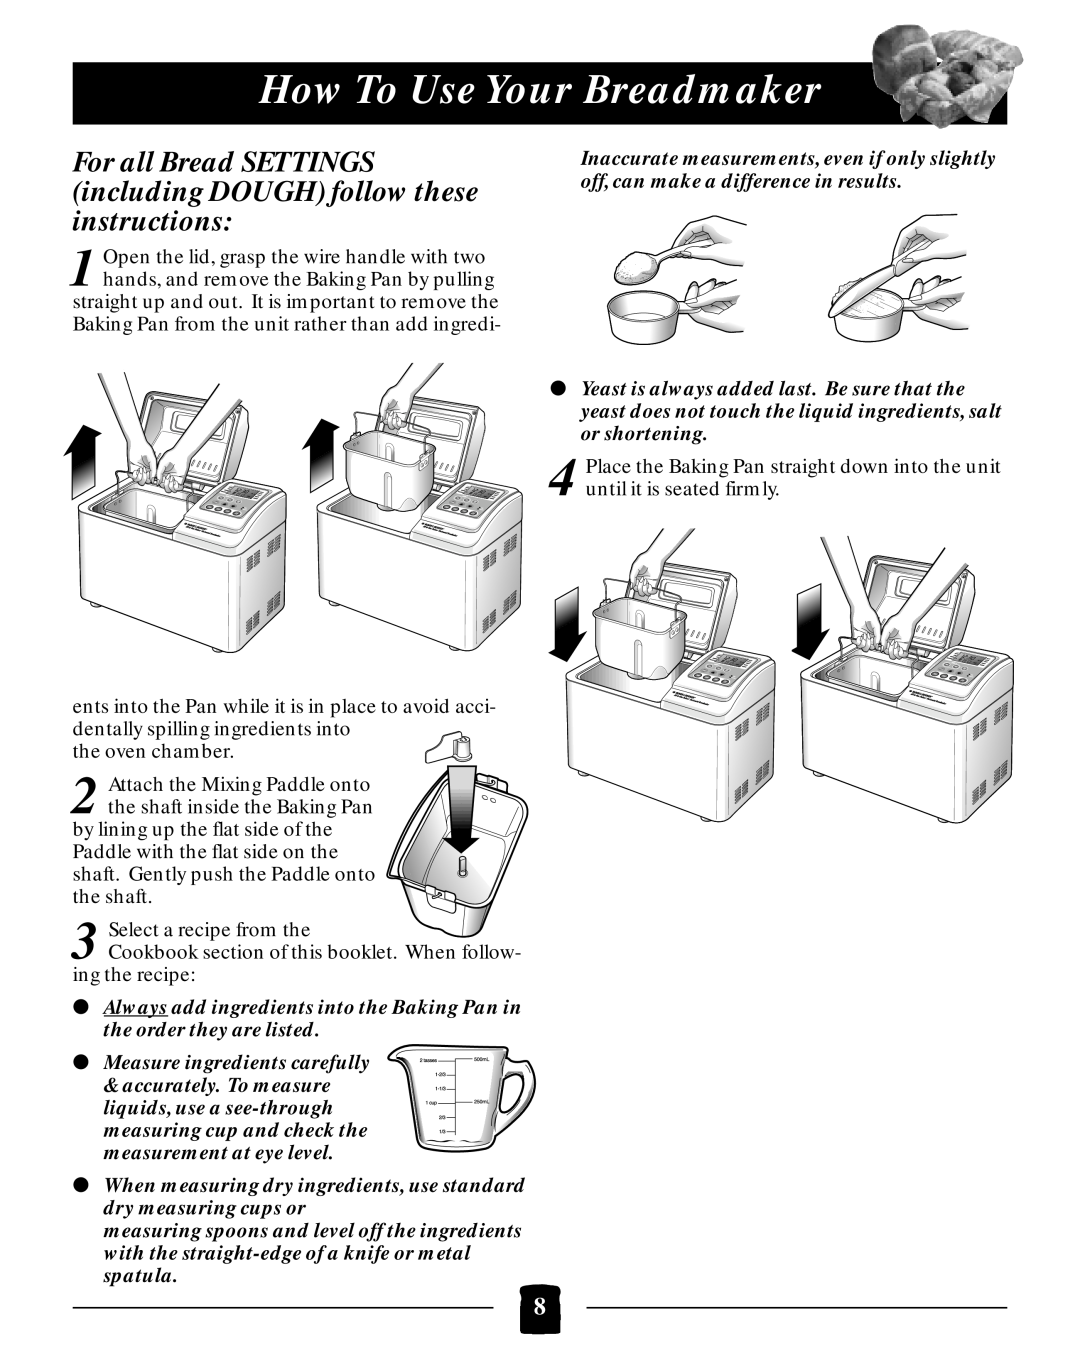 Black & Decker B2005 manual How To Use Your Breadmaker, For all Bread SETTINGS including DOUGH follow these instructions 